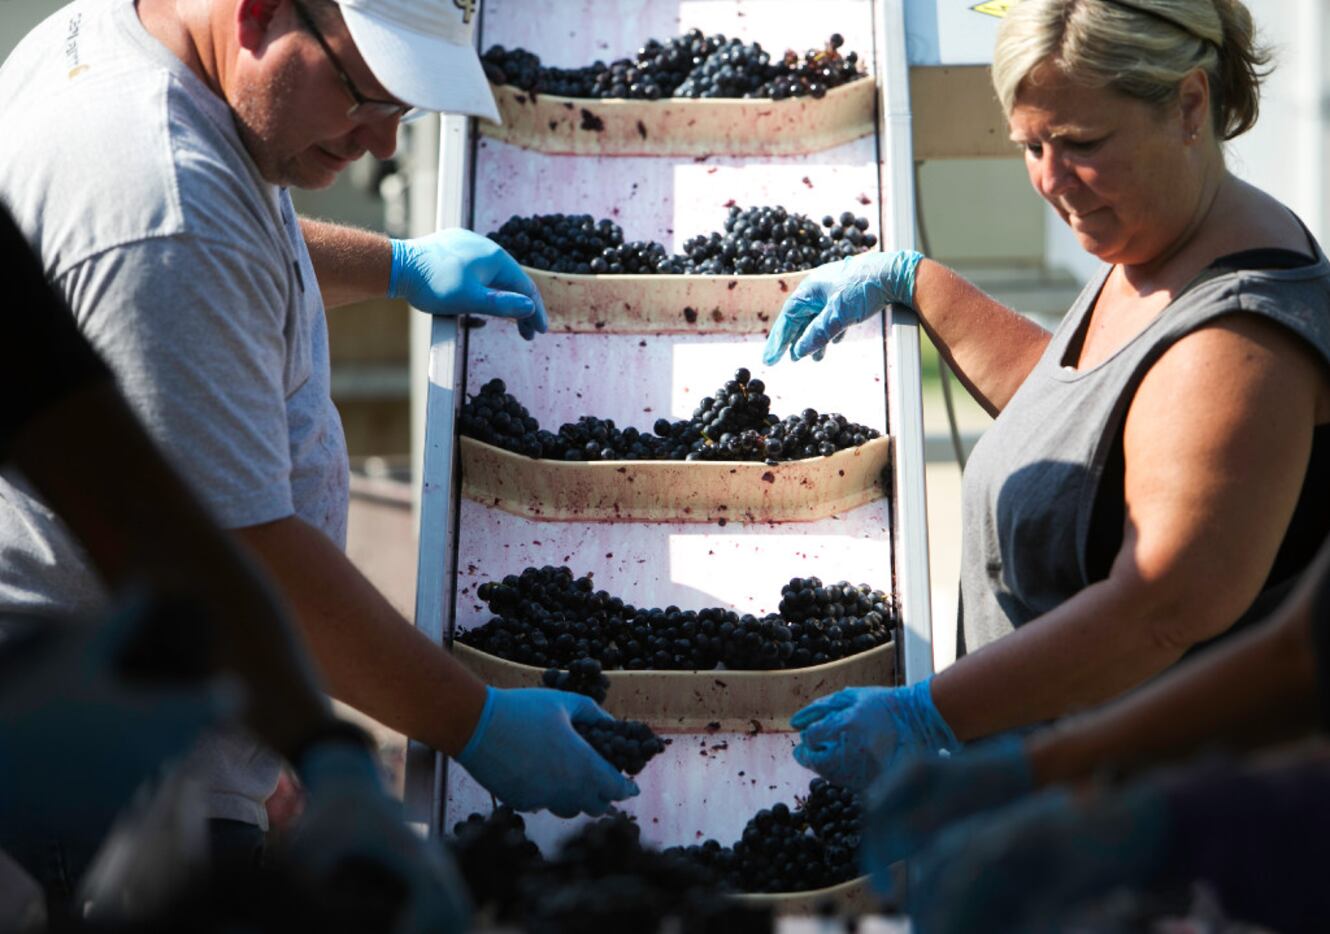 Volunteers sort the grapes before they go into the de-stemmer at the Eden Hill Vineyards in...